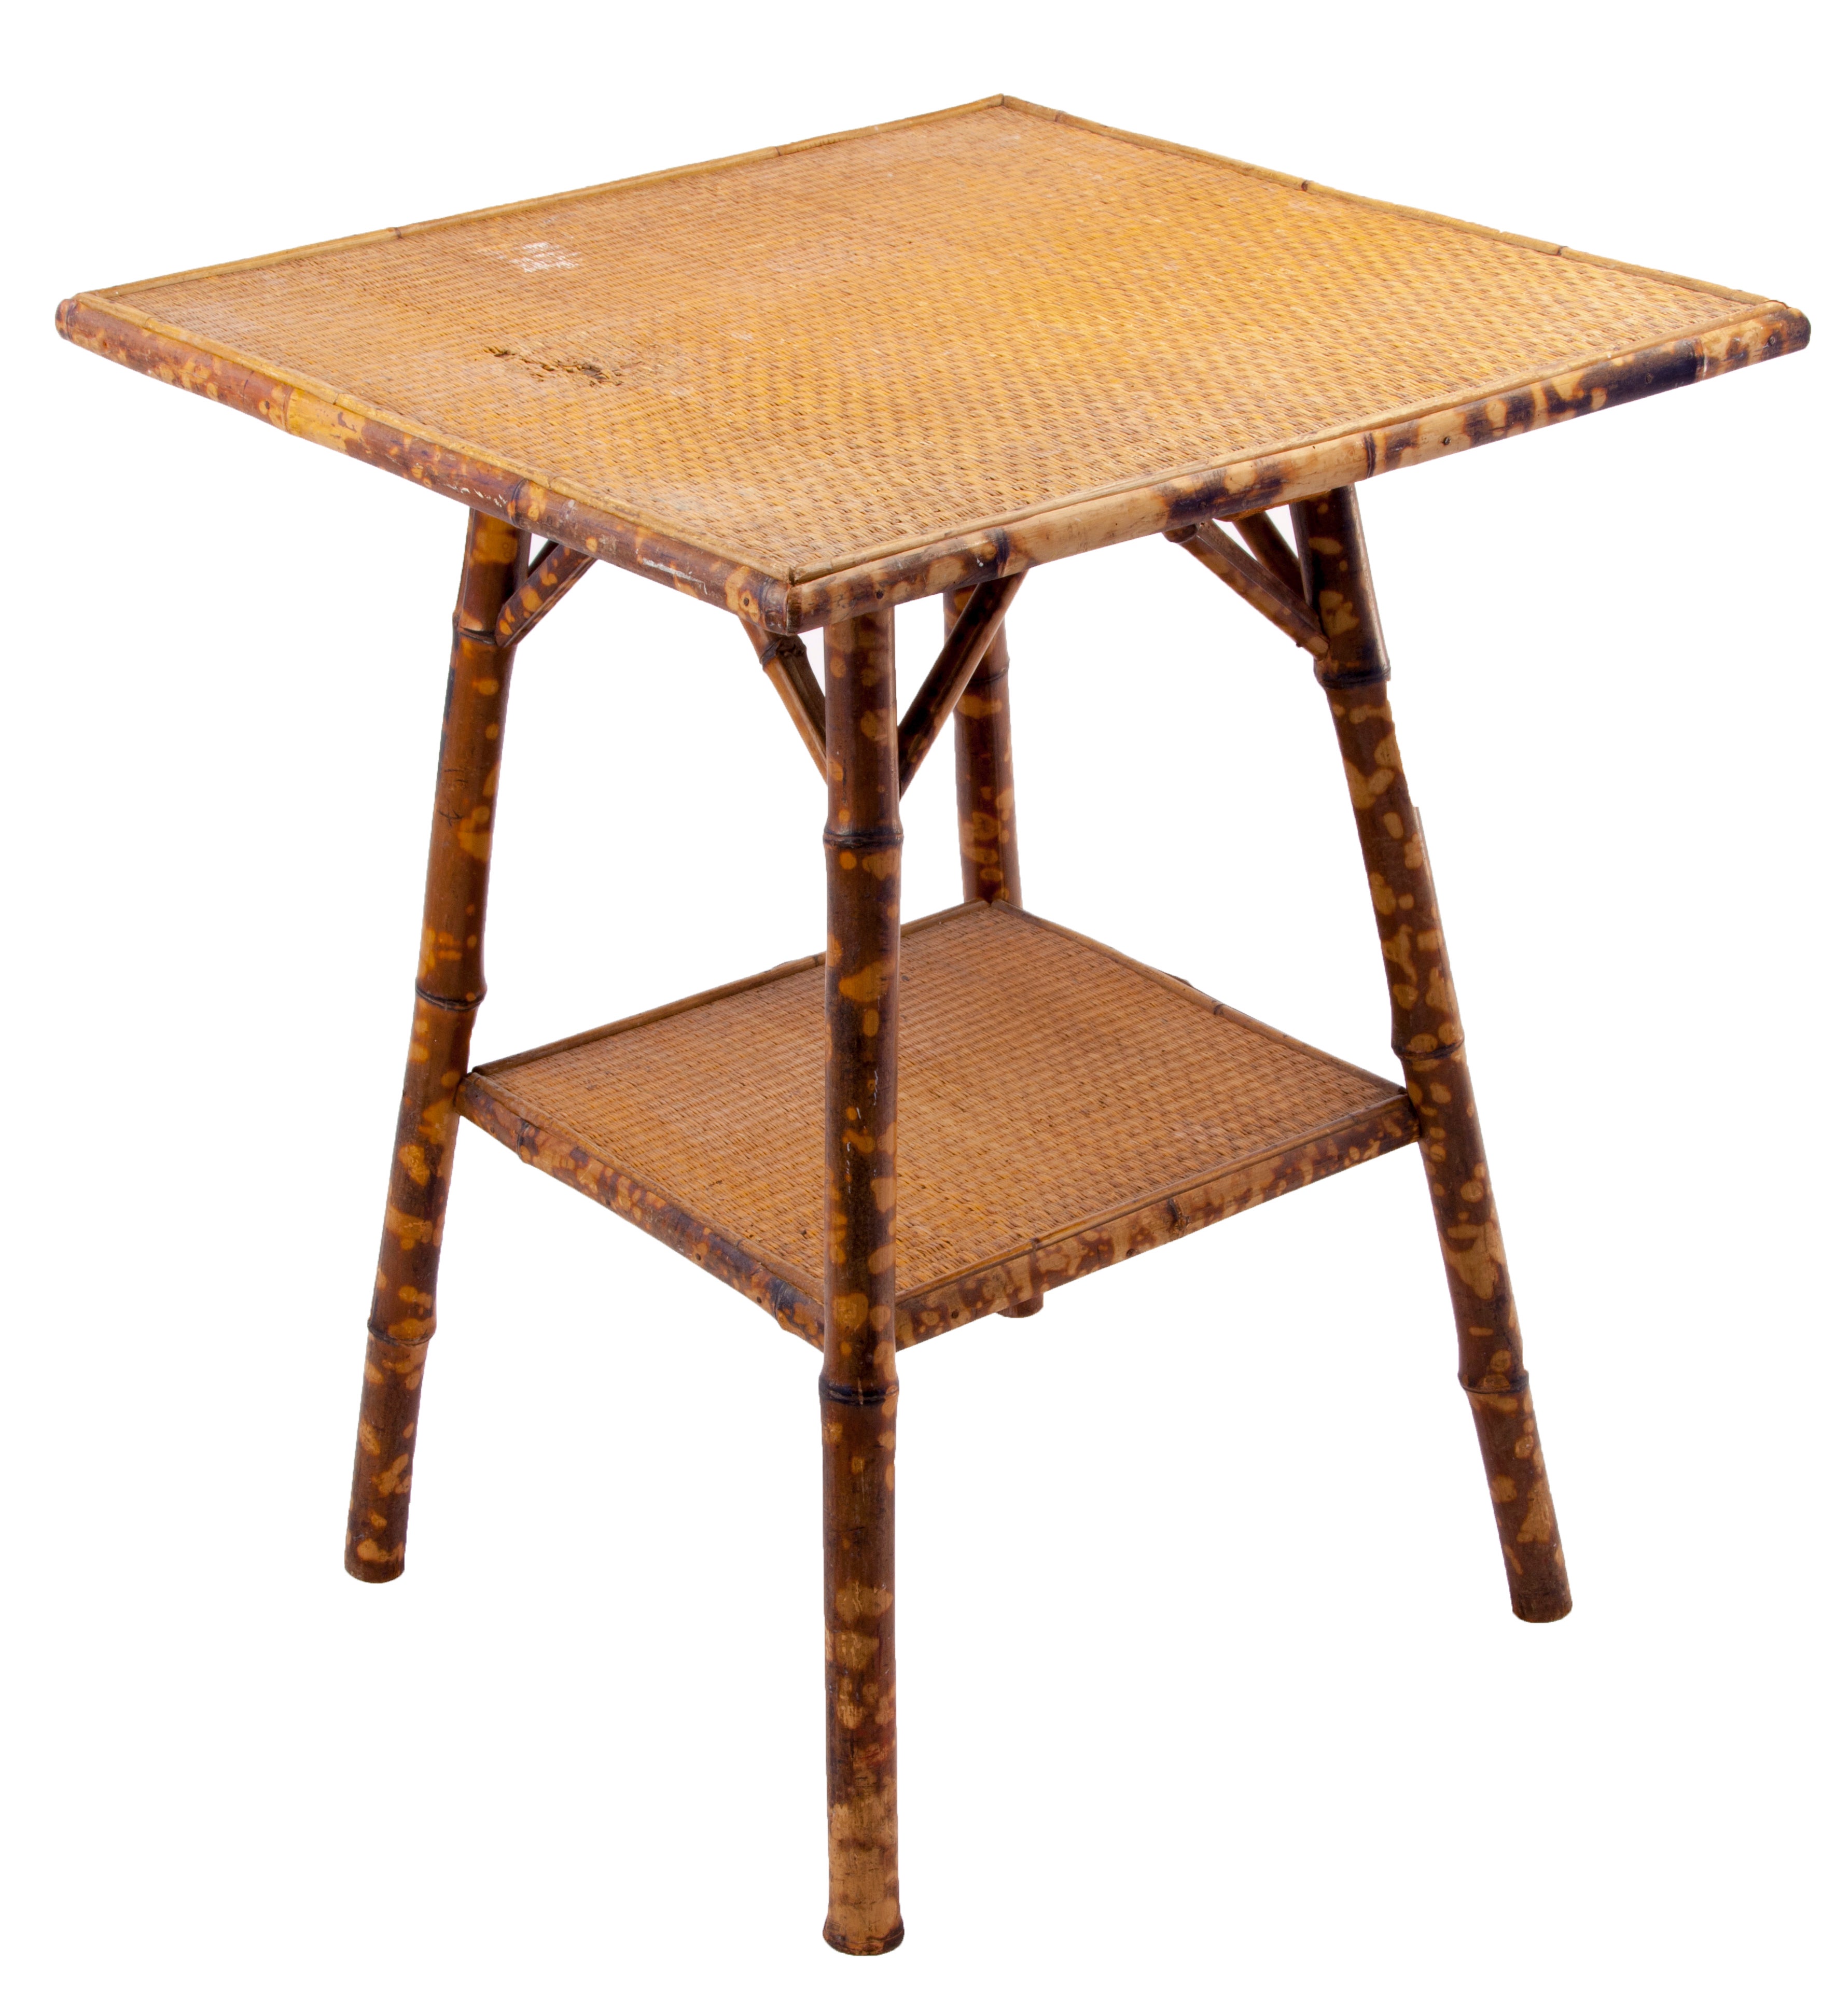 Victorian Tortoise Shell Bamboo and Woven Cane Plant Stand For Sale